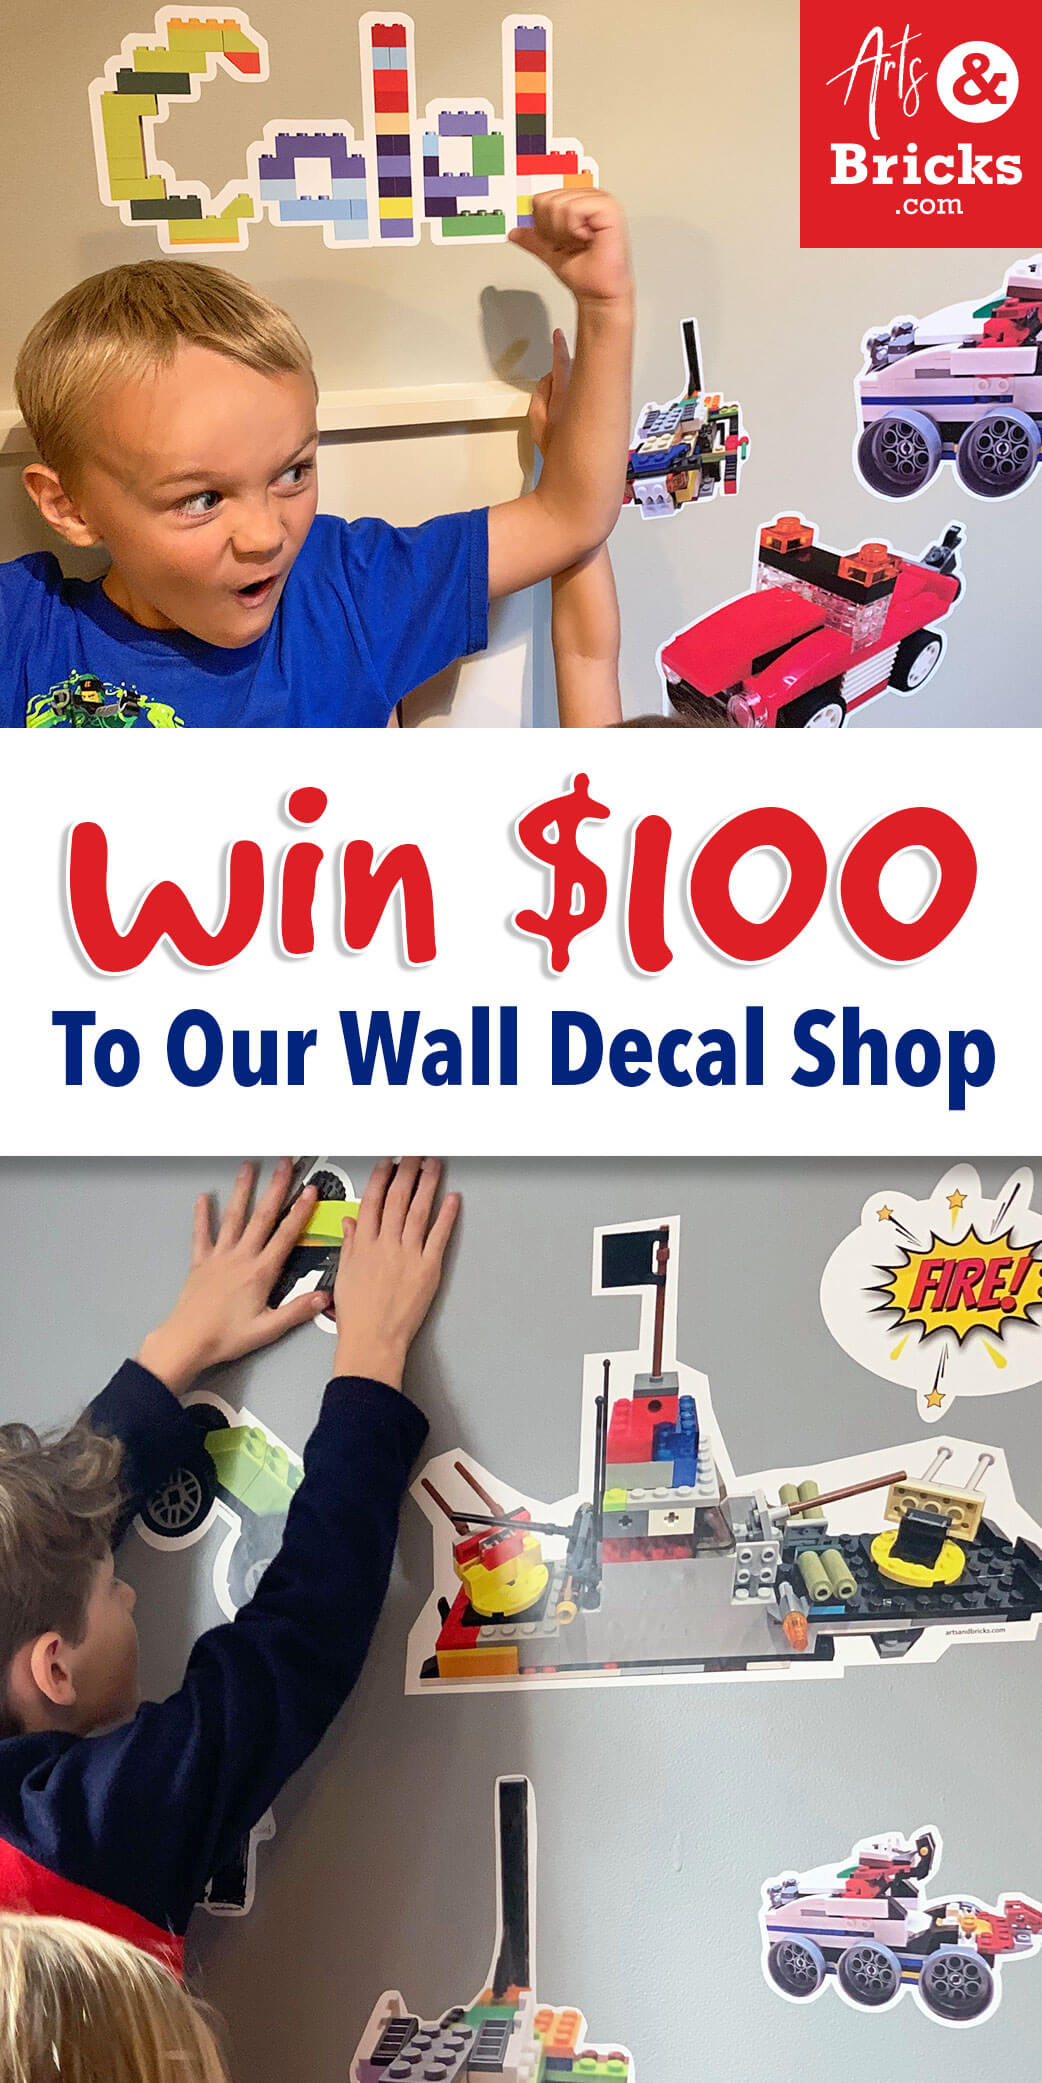 Enter to win $100 to ArtsandBricks.com Wall Decal Shop. Featuring kids's wall vinyl decals and stickers -- even designs your own kids make. Name stickers, subscriptions, pre-made designs and custom designs. #artsandbricks #giveaway #entertowin #walldecor #forkids #legoroom #lego #kiddrawn #brickbuilt #wallstickers